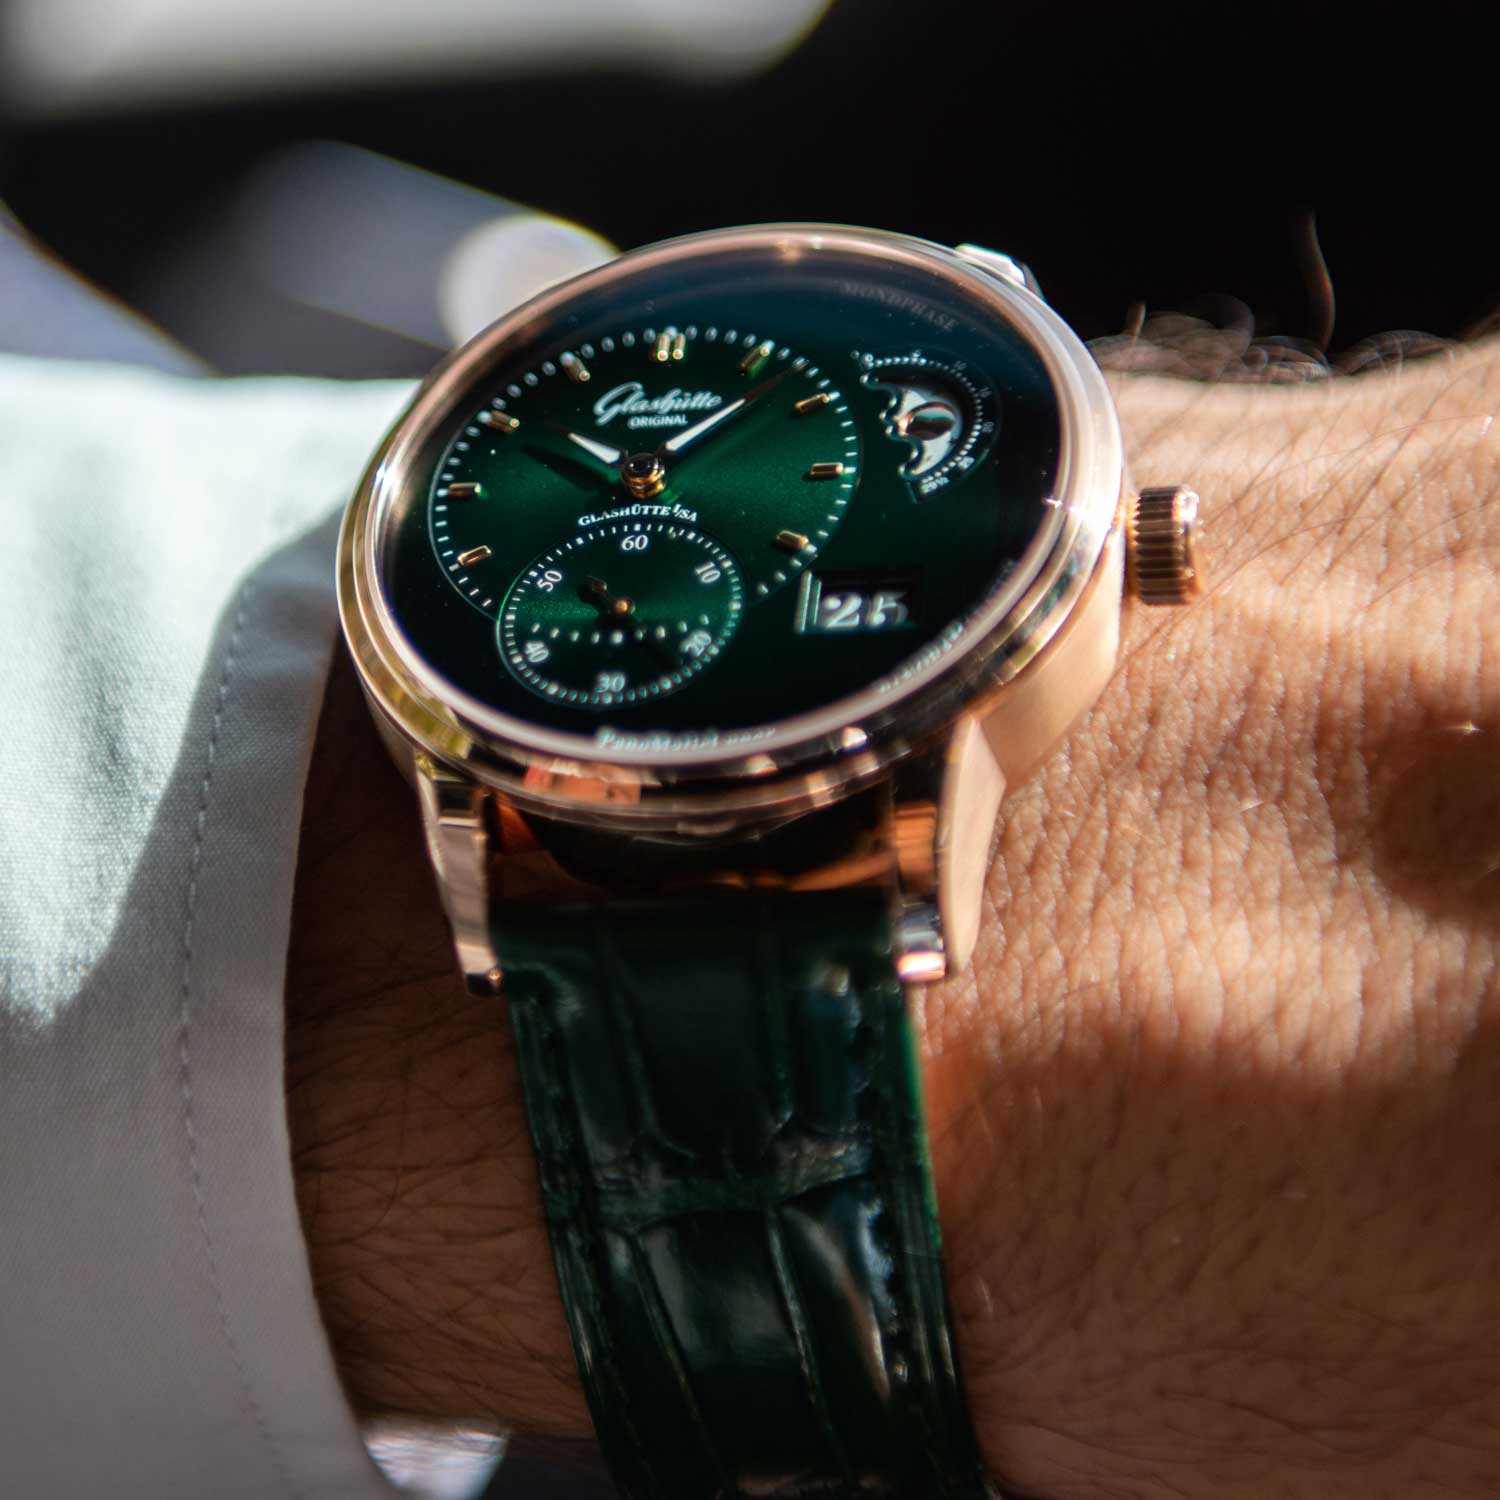 The dial is an intense dark green in the center and gradually changes to black at the edges